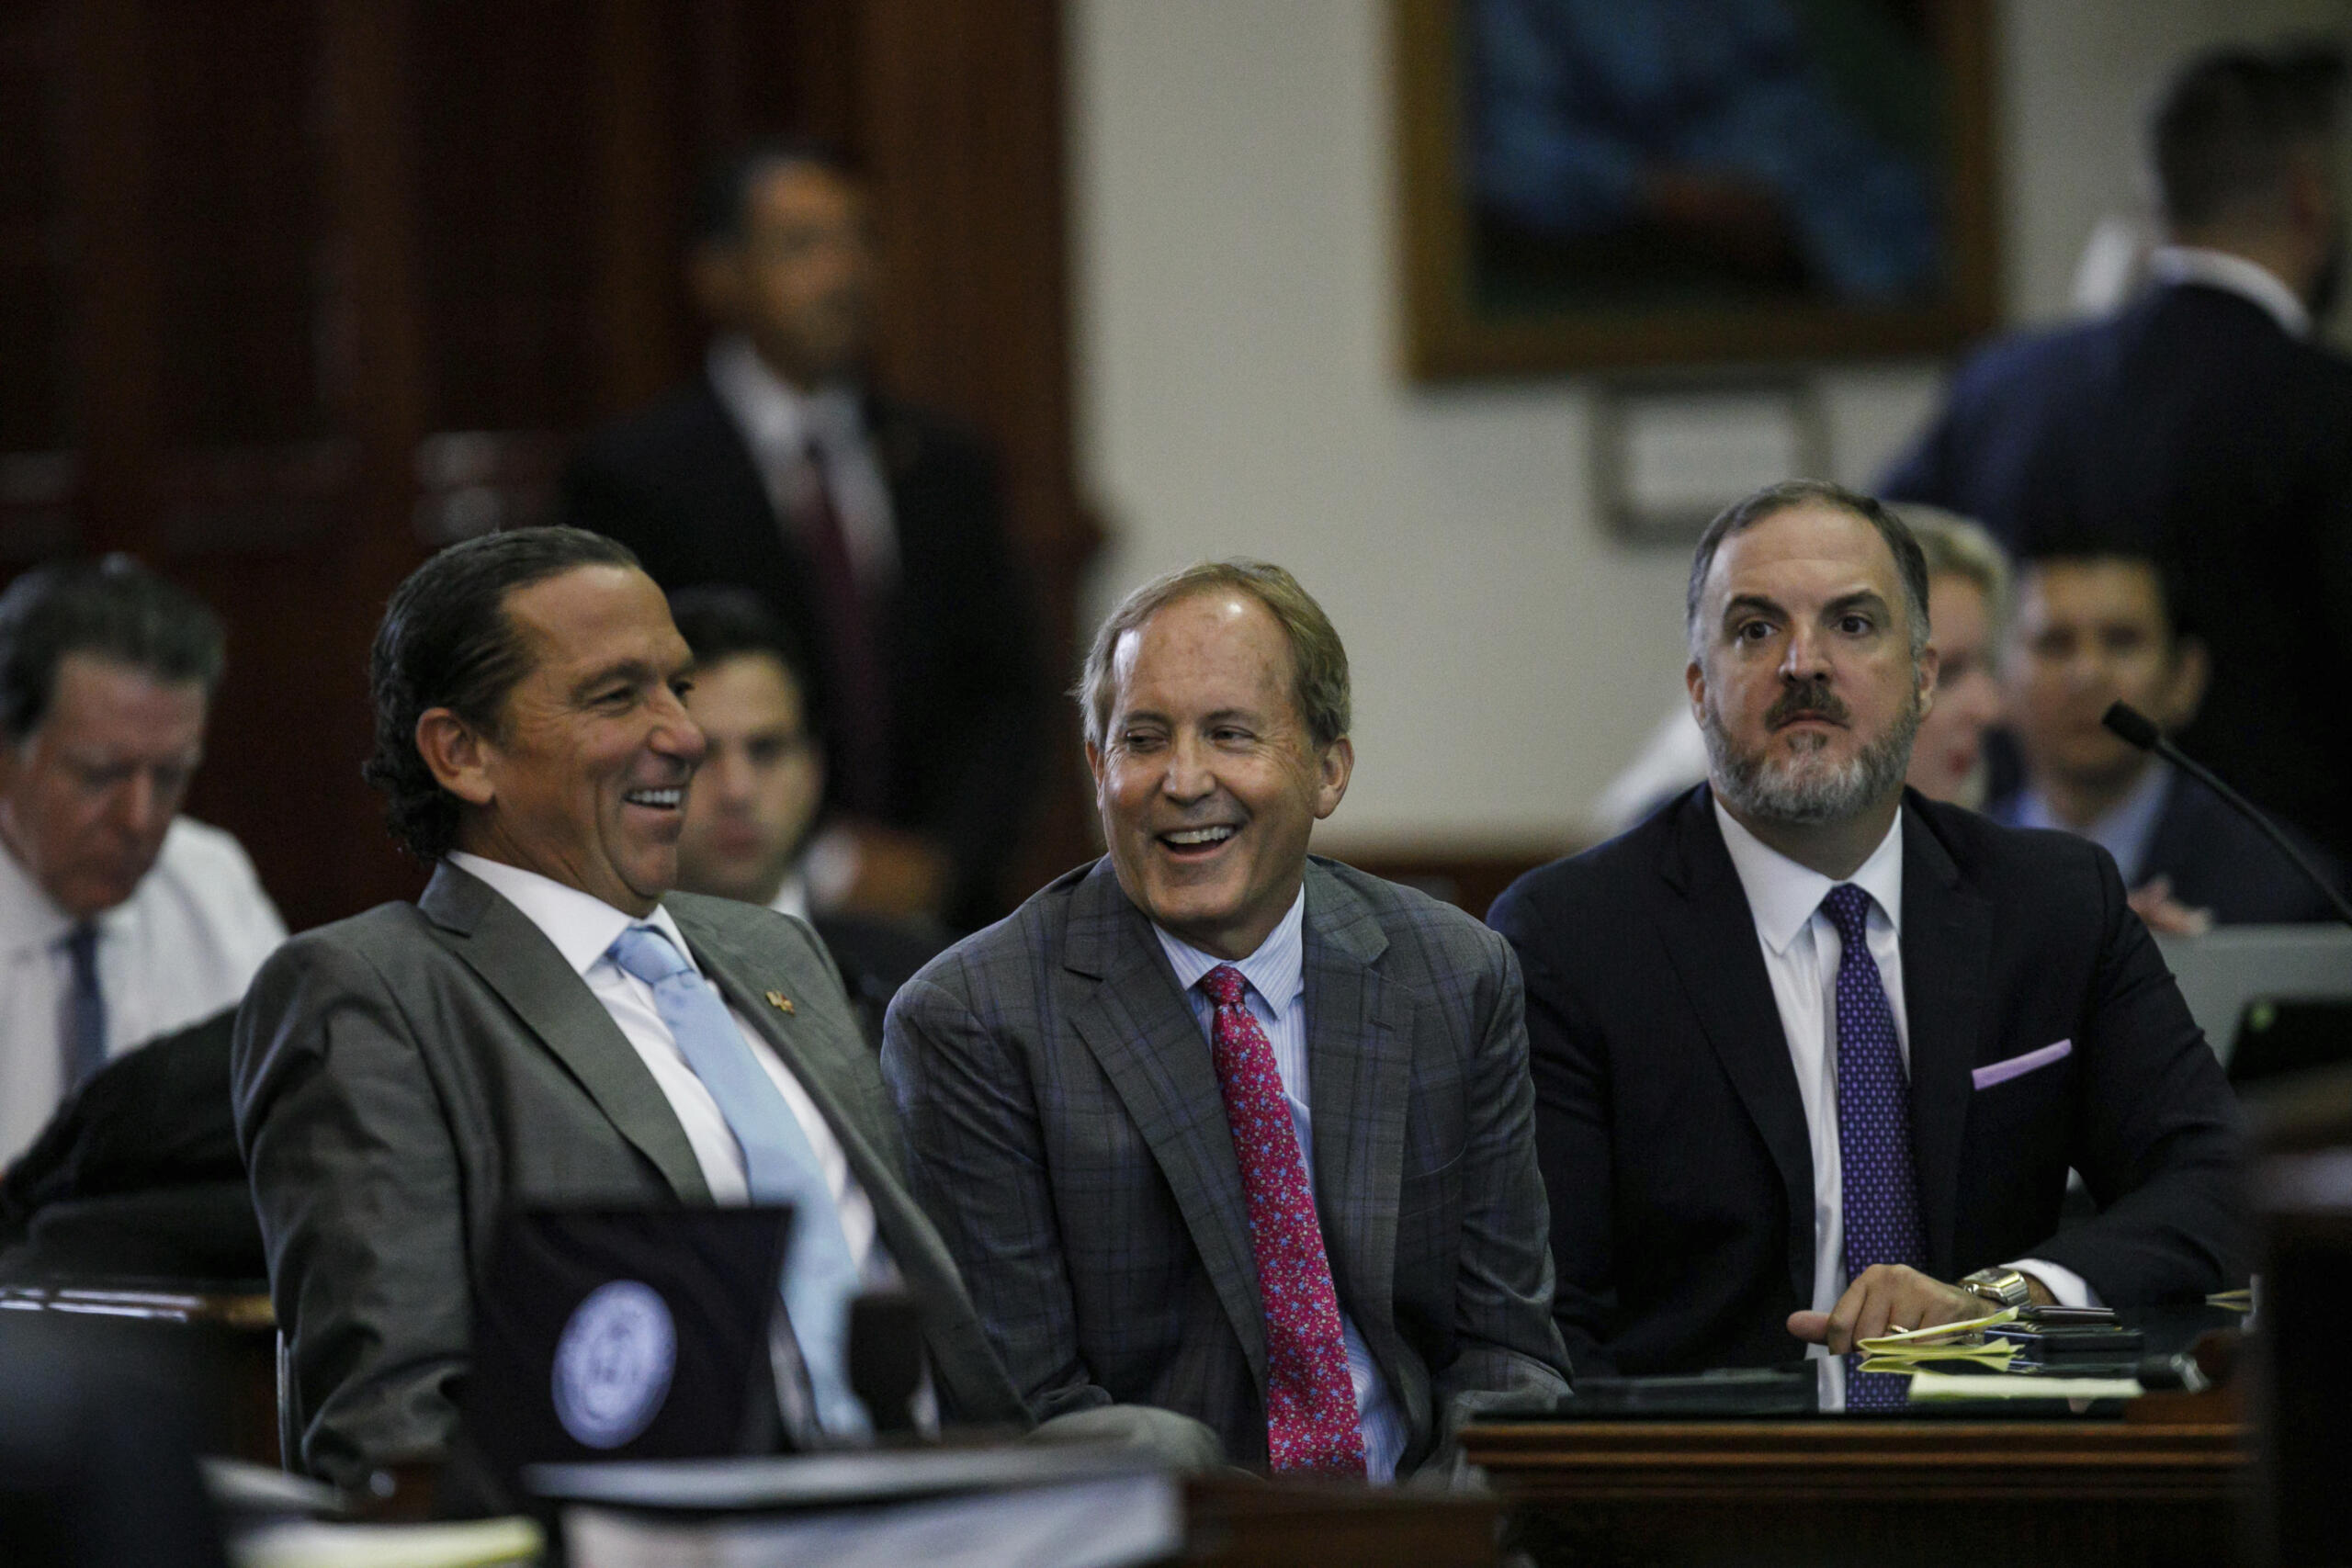 Texas Attorney General Ken Paxton, center, sits between defense attorneys Tony Buzbee, left, and Mitch Little, right, before his impeachment trial resumes in the Senate Chamber at the Texas Capitol on Friday, Sept. 15, 2023, in Austin, Texas.